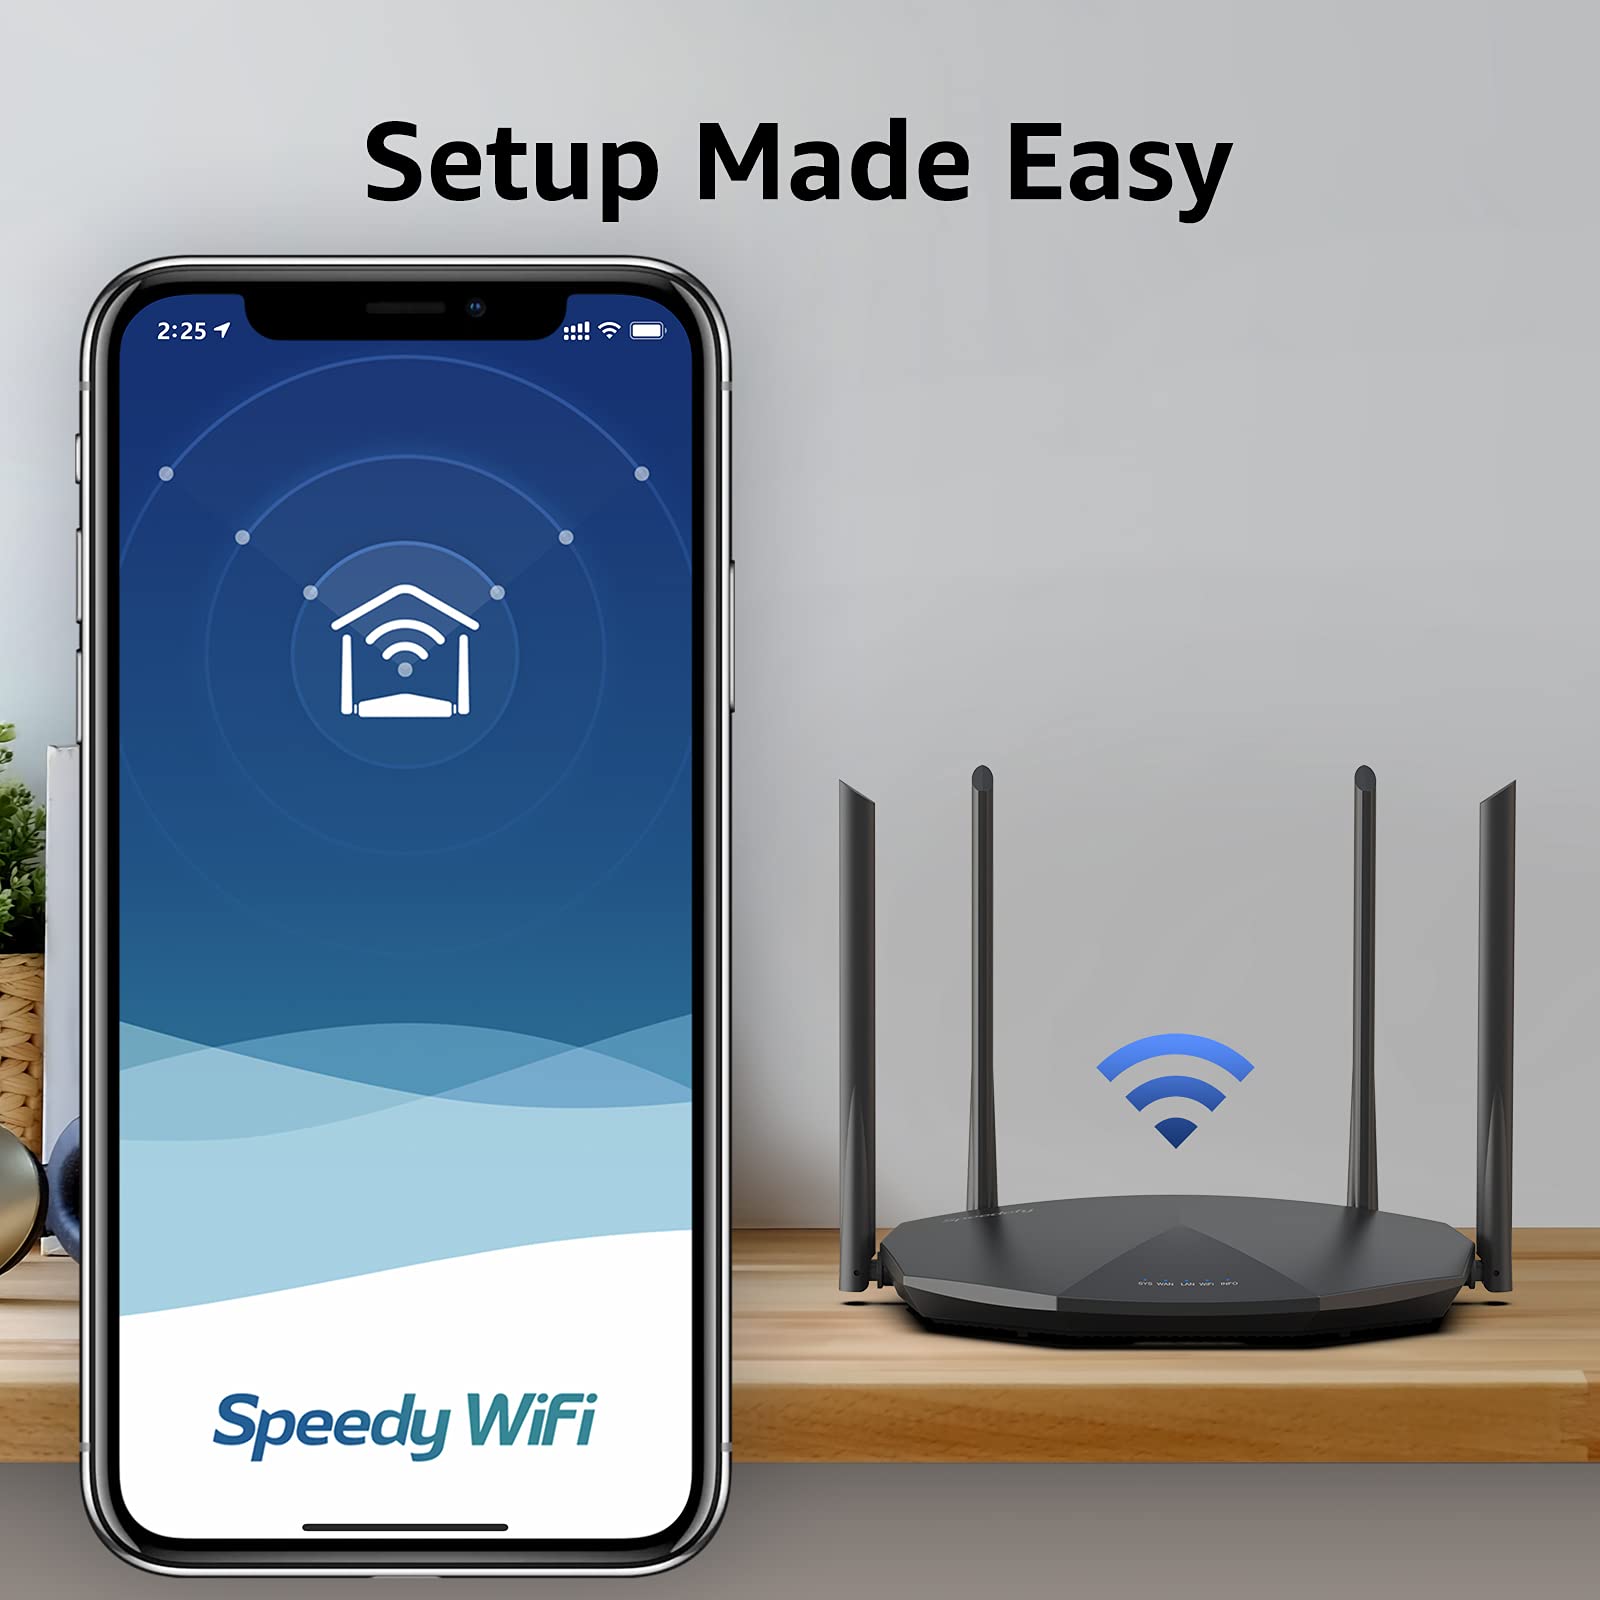 Speedefy High Speed Pro WiFi Router - Dual Band AC2100 Wireless Router for Streaming & Gaming, Up to 35 Devices, 2000 sq.ft Coverage, 4X4 MU-MIMO, USB Port, Parental Control (Model: K8)